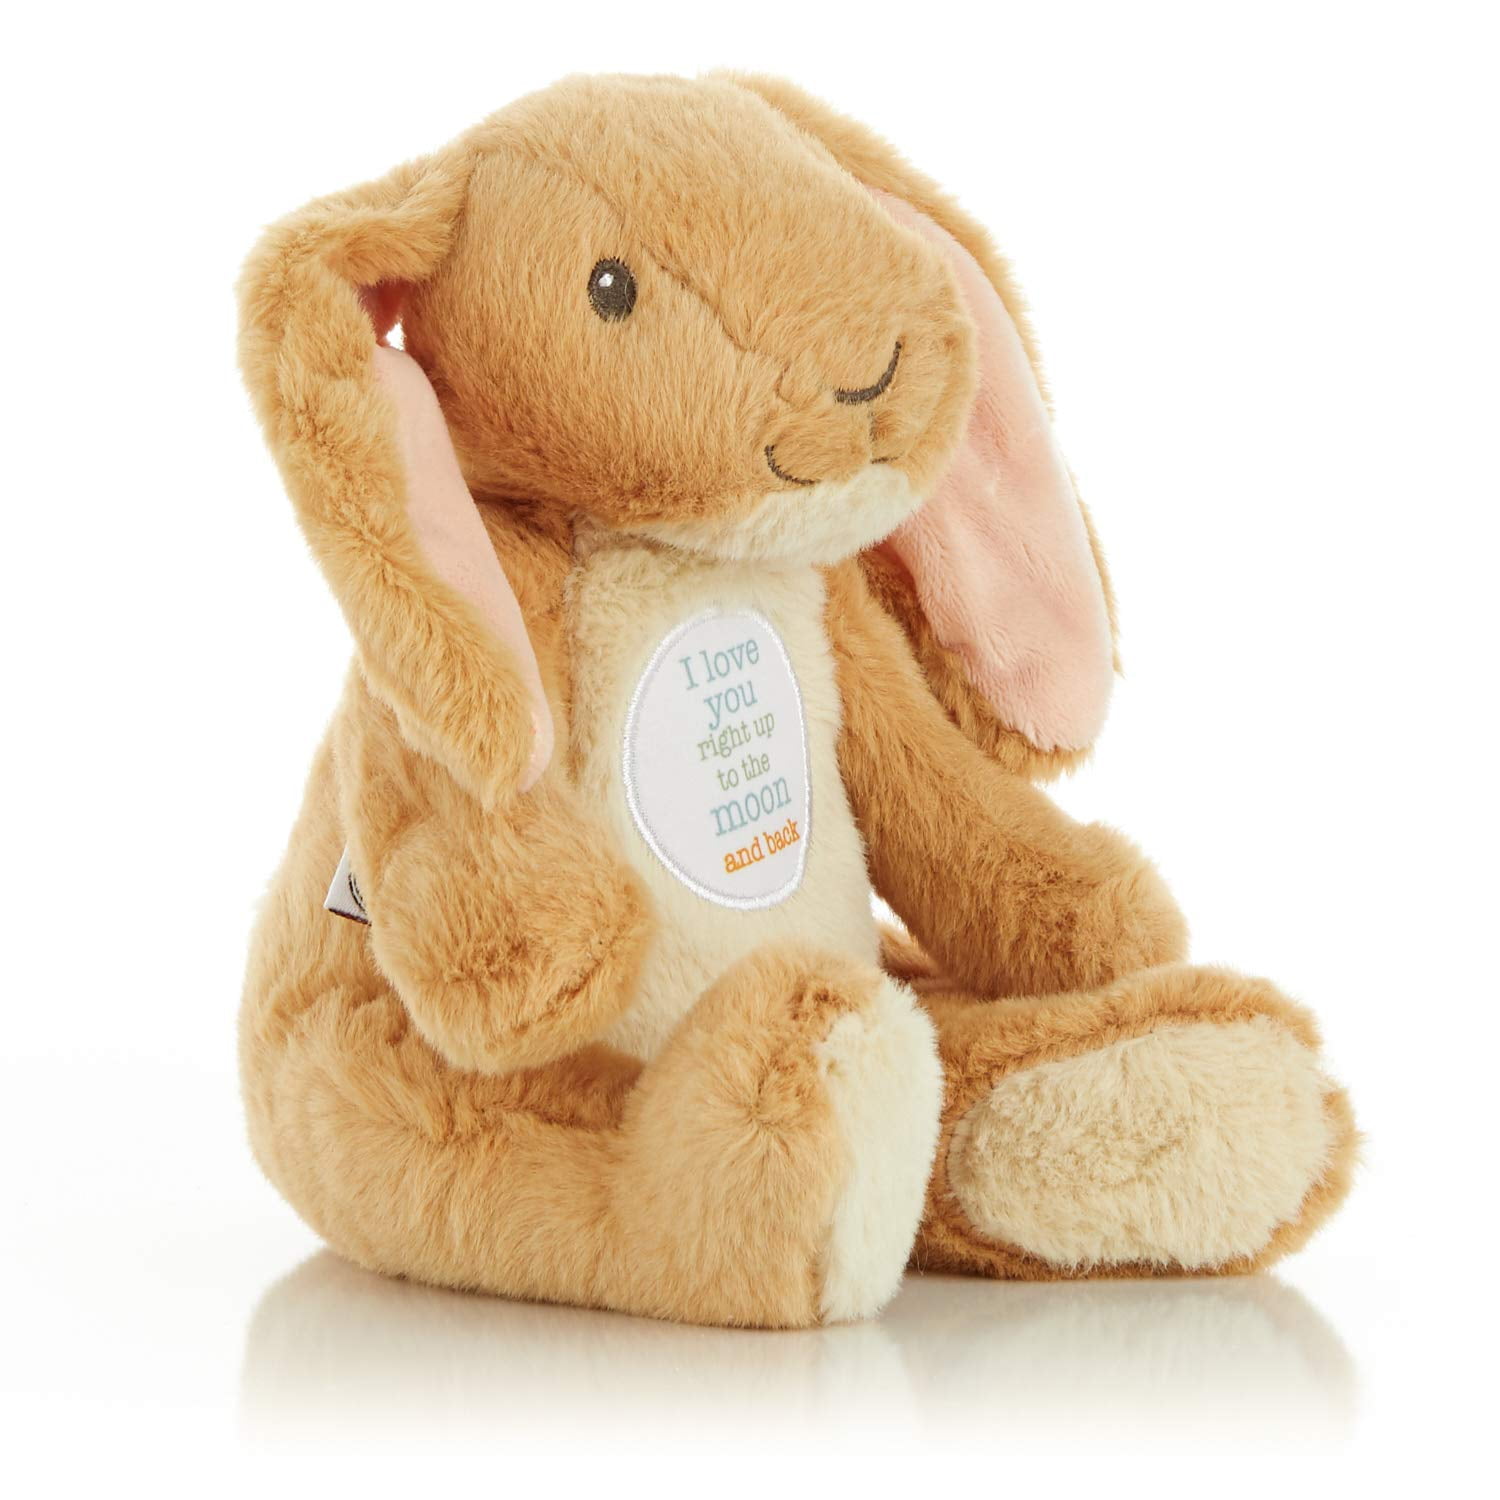 bede chauffør lejer Guess How Much I Love You Nutbrown Hare Bean Bag Plush, 9 inches -  Walmart.com